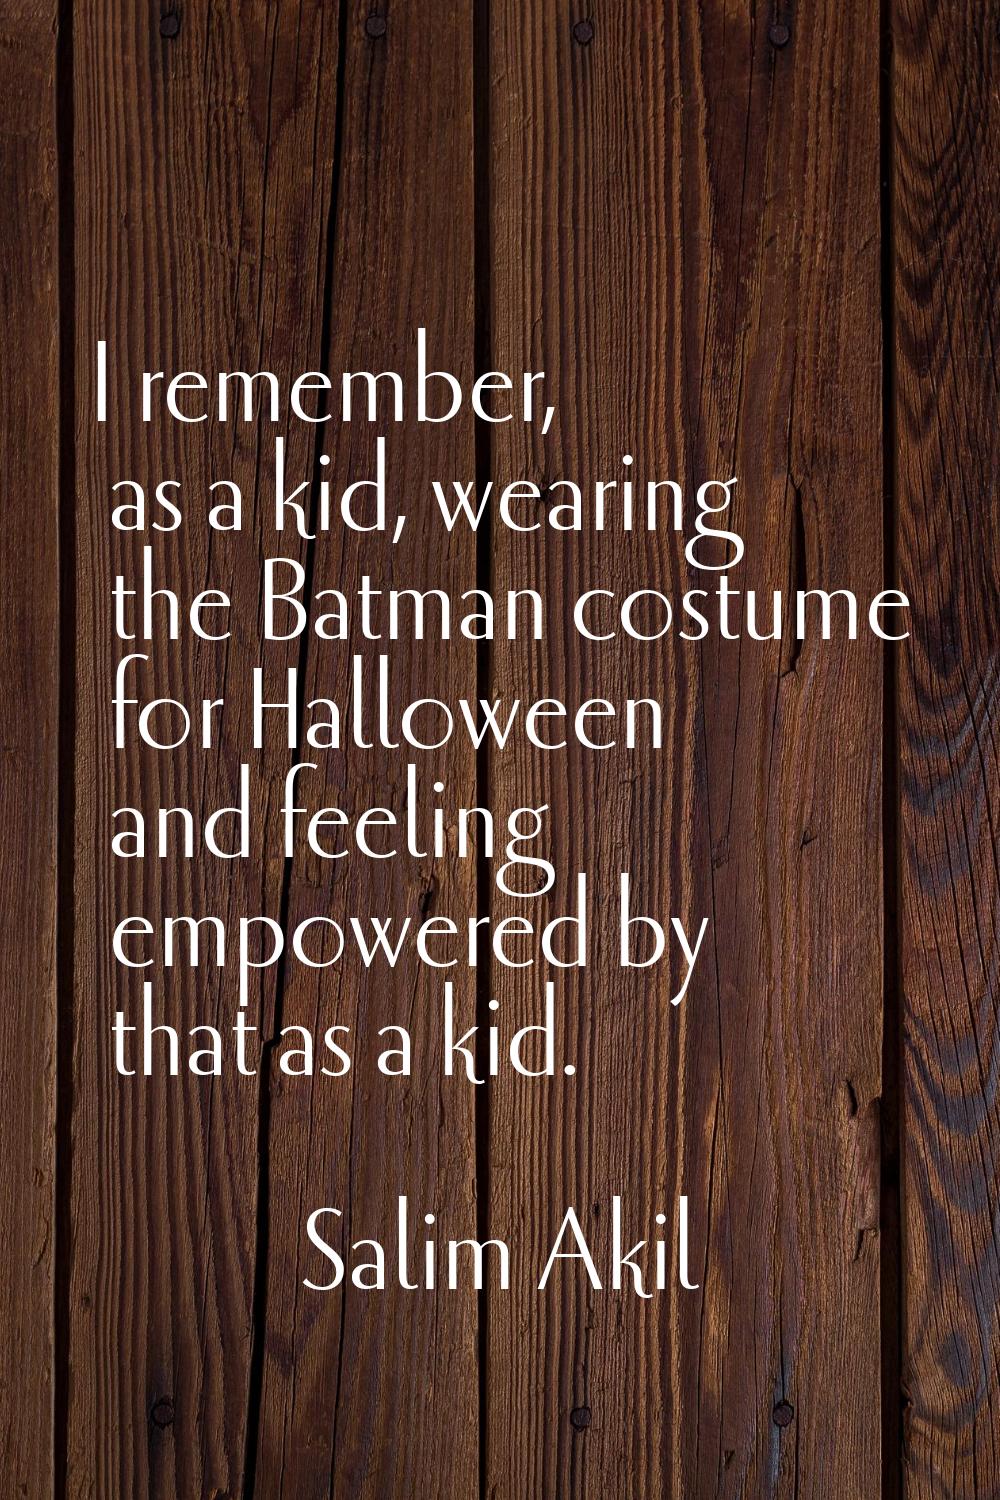 I remember, as a kid, wearing the Batman costume for Halloween and feeling empowered by that as a k